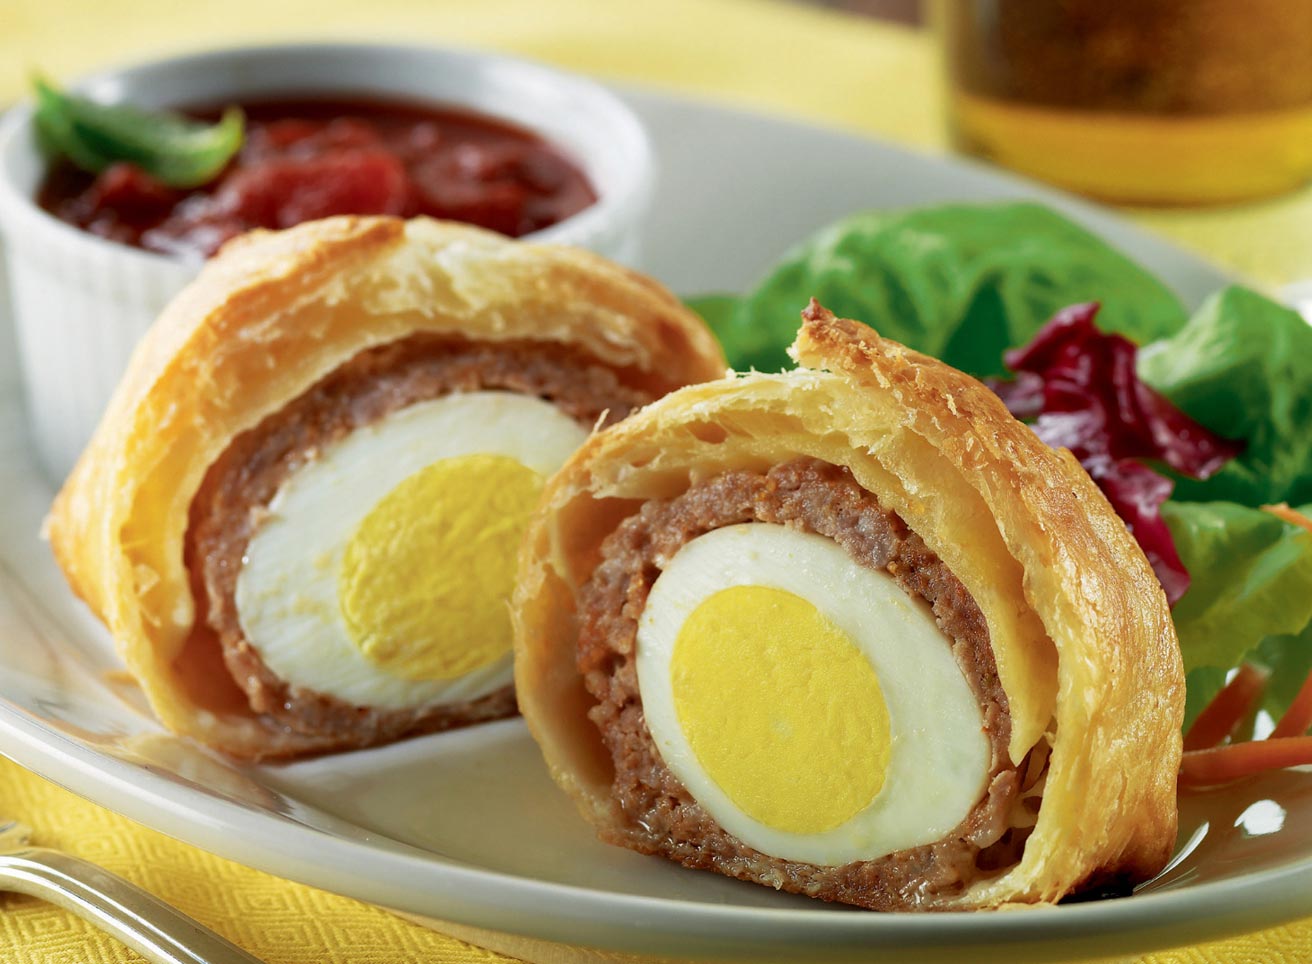 Sausage and Puff Pastry Wrapped Eggs